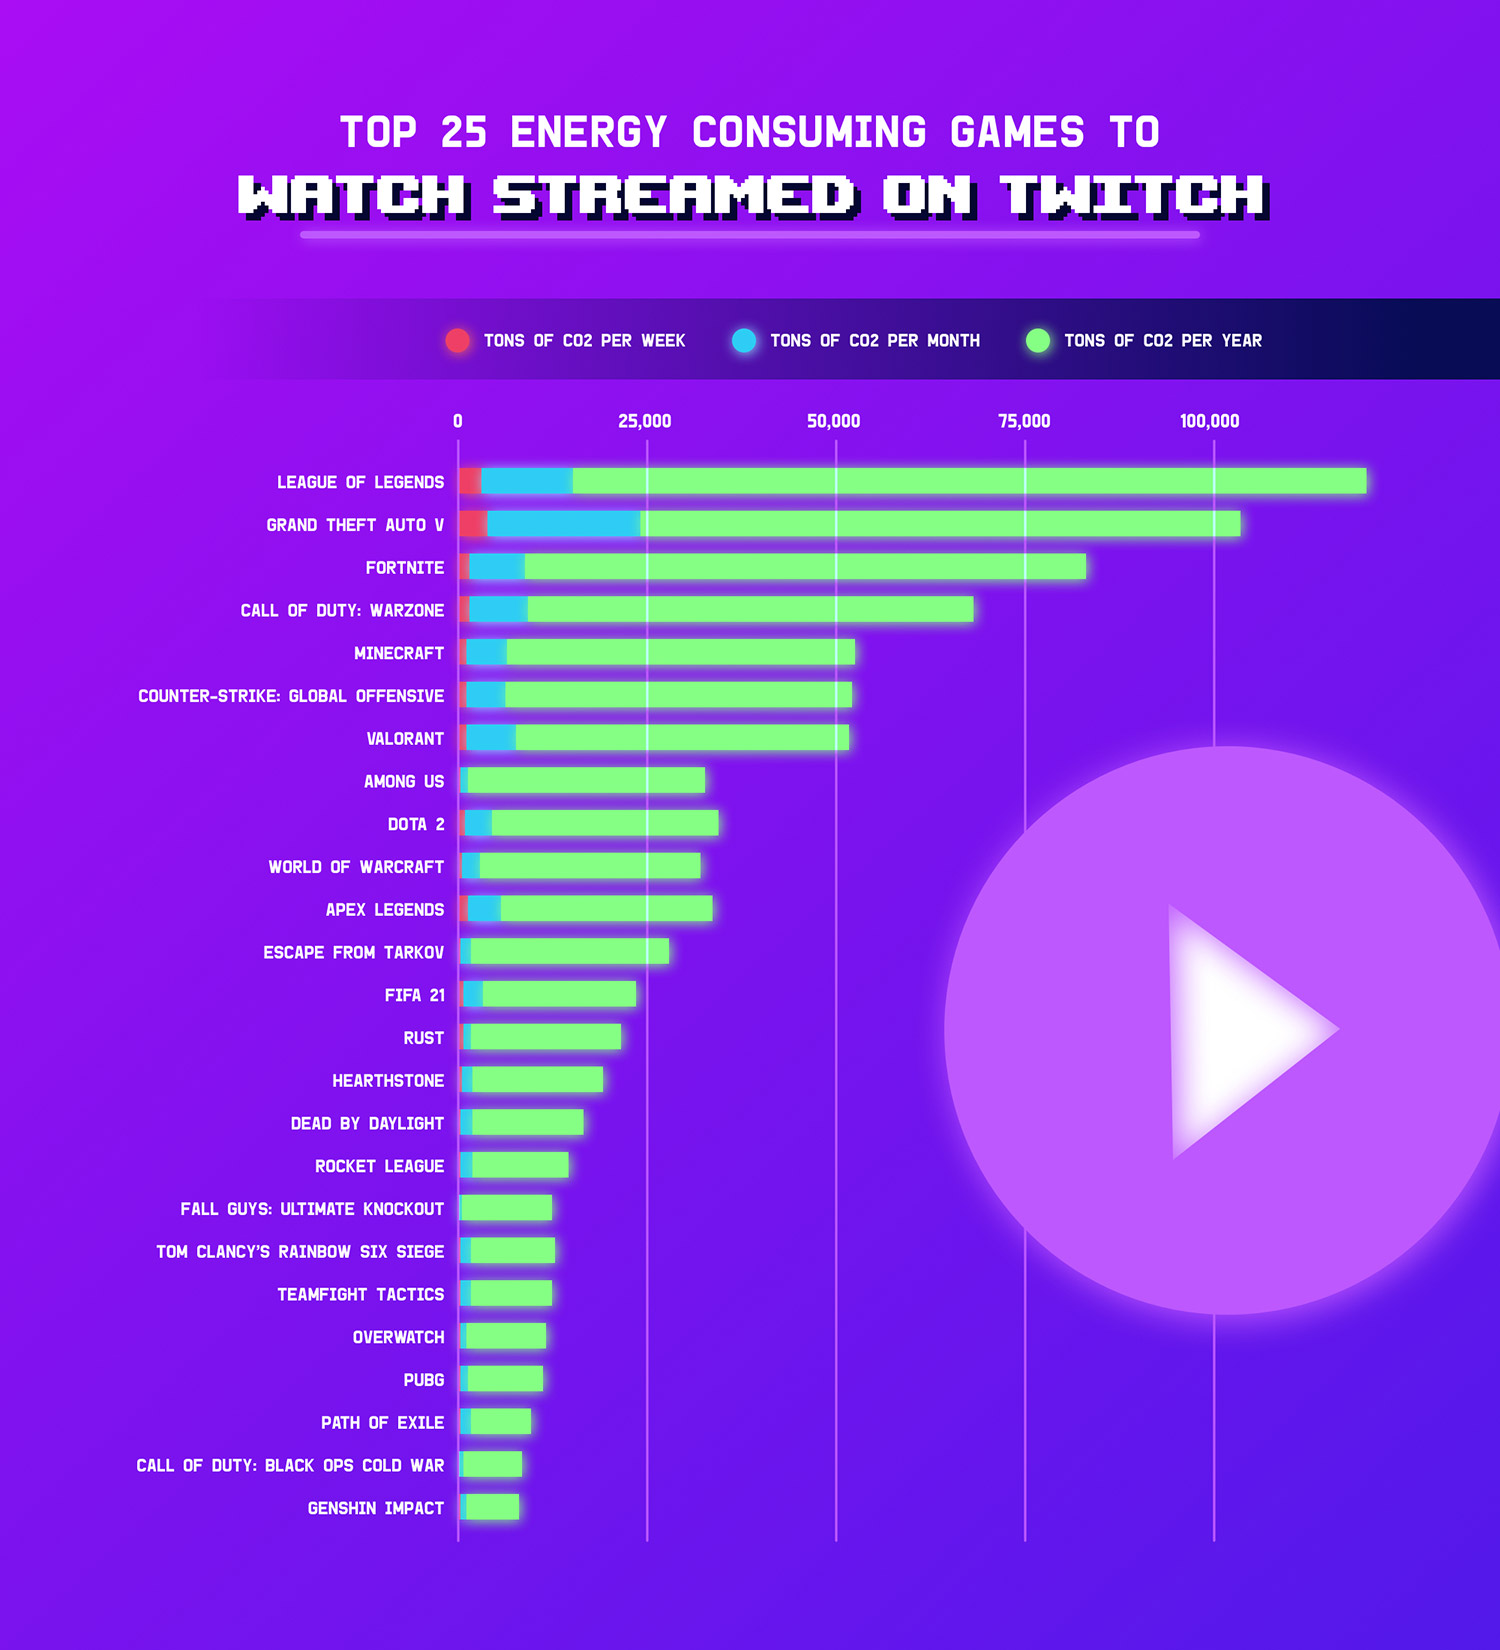 The 25 biggest energy consuming game streams being watched on Twitch, over the past 12 months